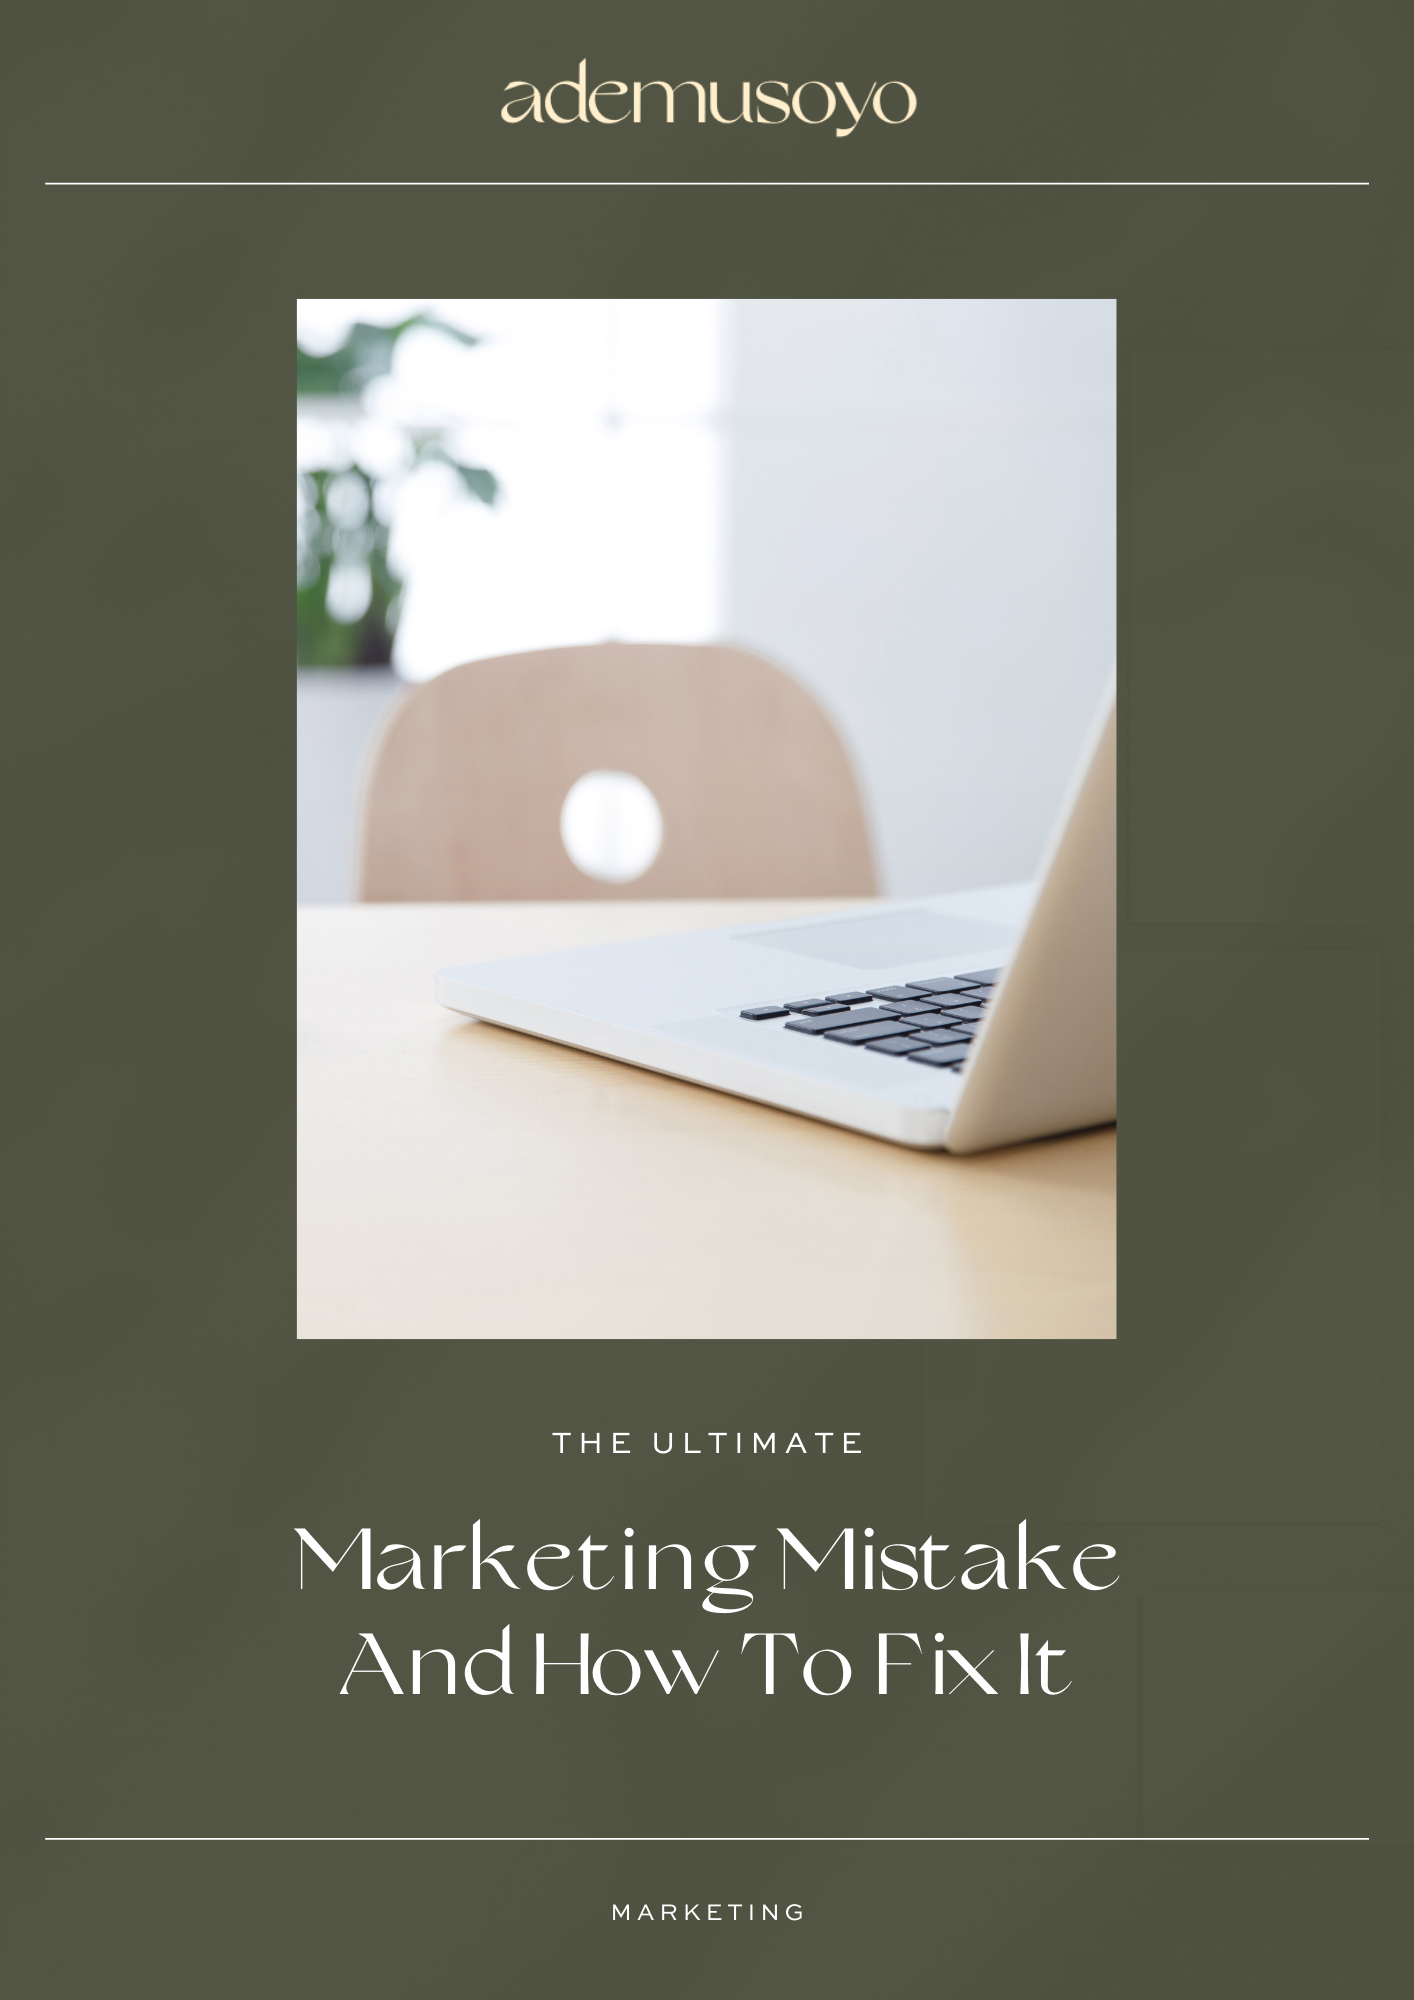 The Ultimate Marketing Mistake And How To Fix It